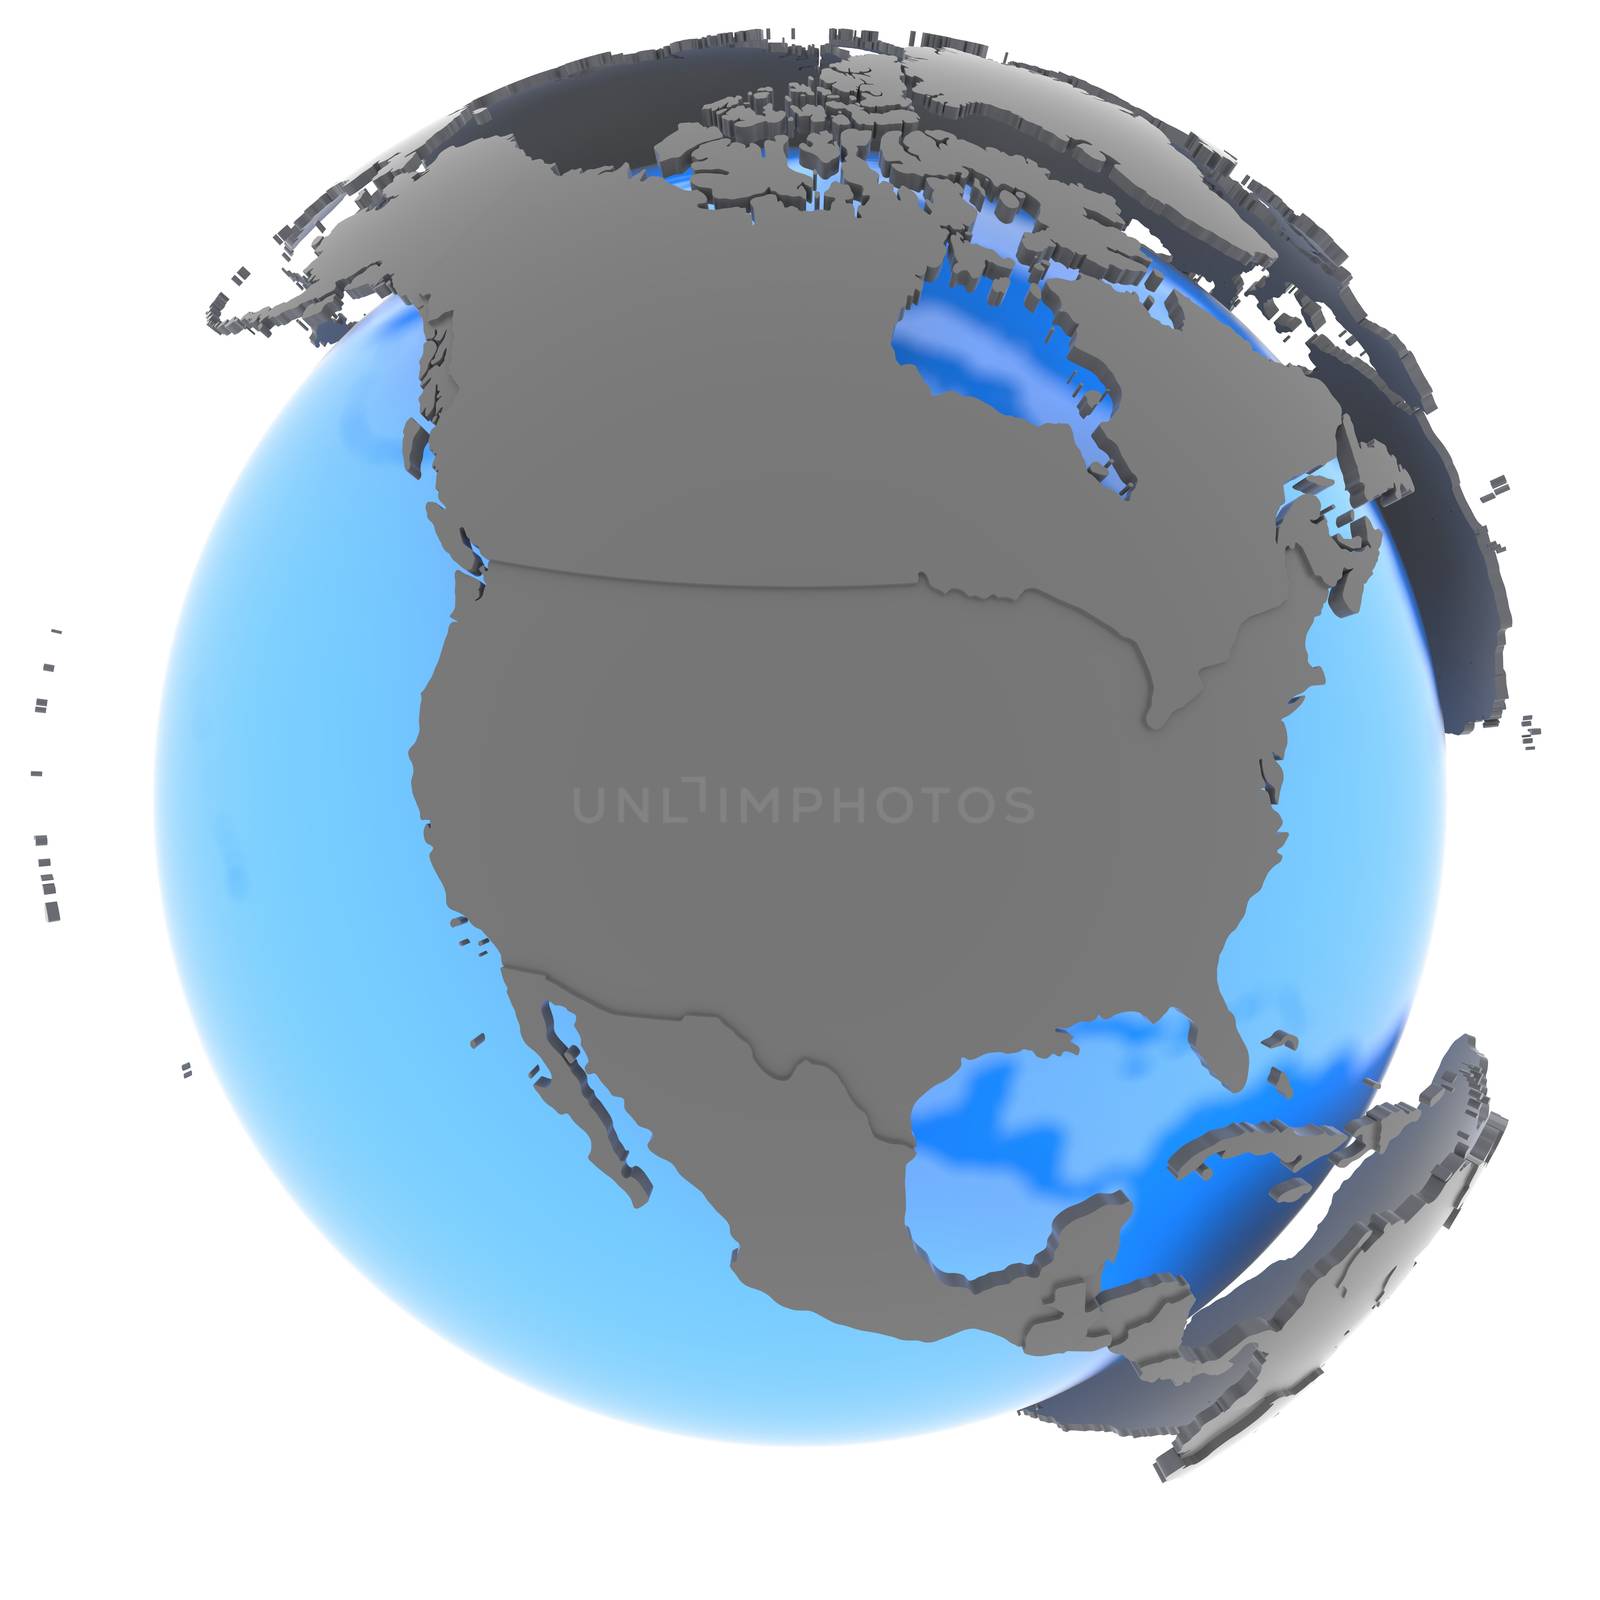 North America on the globe by Harvepino